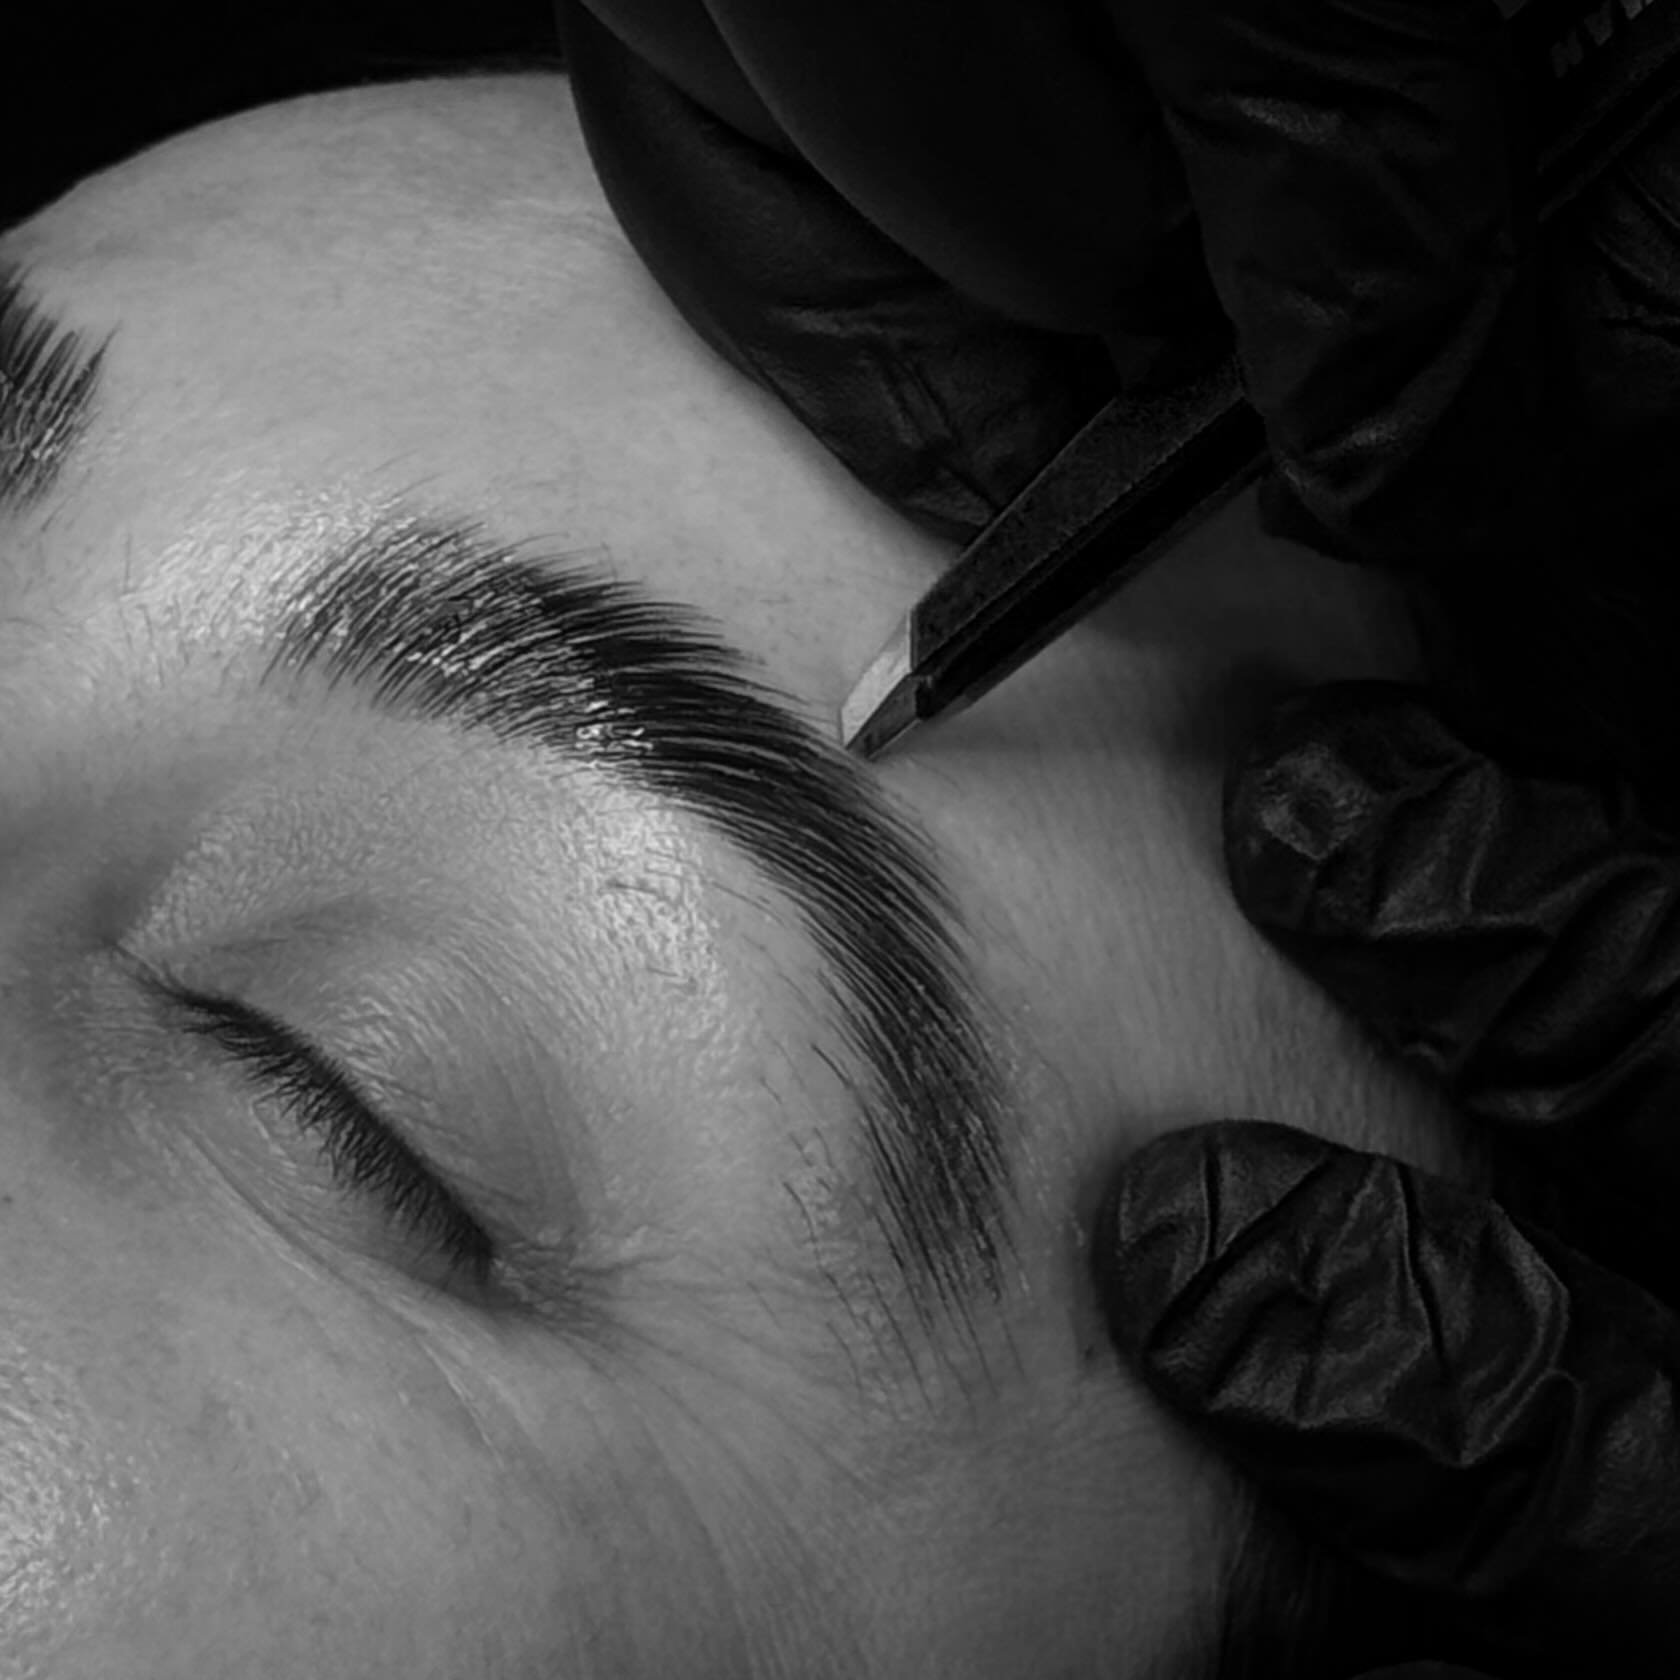 Big brow envy 🪭 @browsbyleo 
www.studiosimonyi.com Appointments can be made online or use or booking link 🔗 in our bio

#cosmetictattooing #browslayer #eyebrowtattooing #browaddict #browshading #browmicroblading #microbladingsandiego #microbladed #